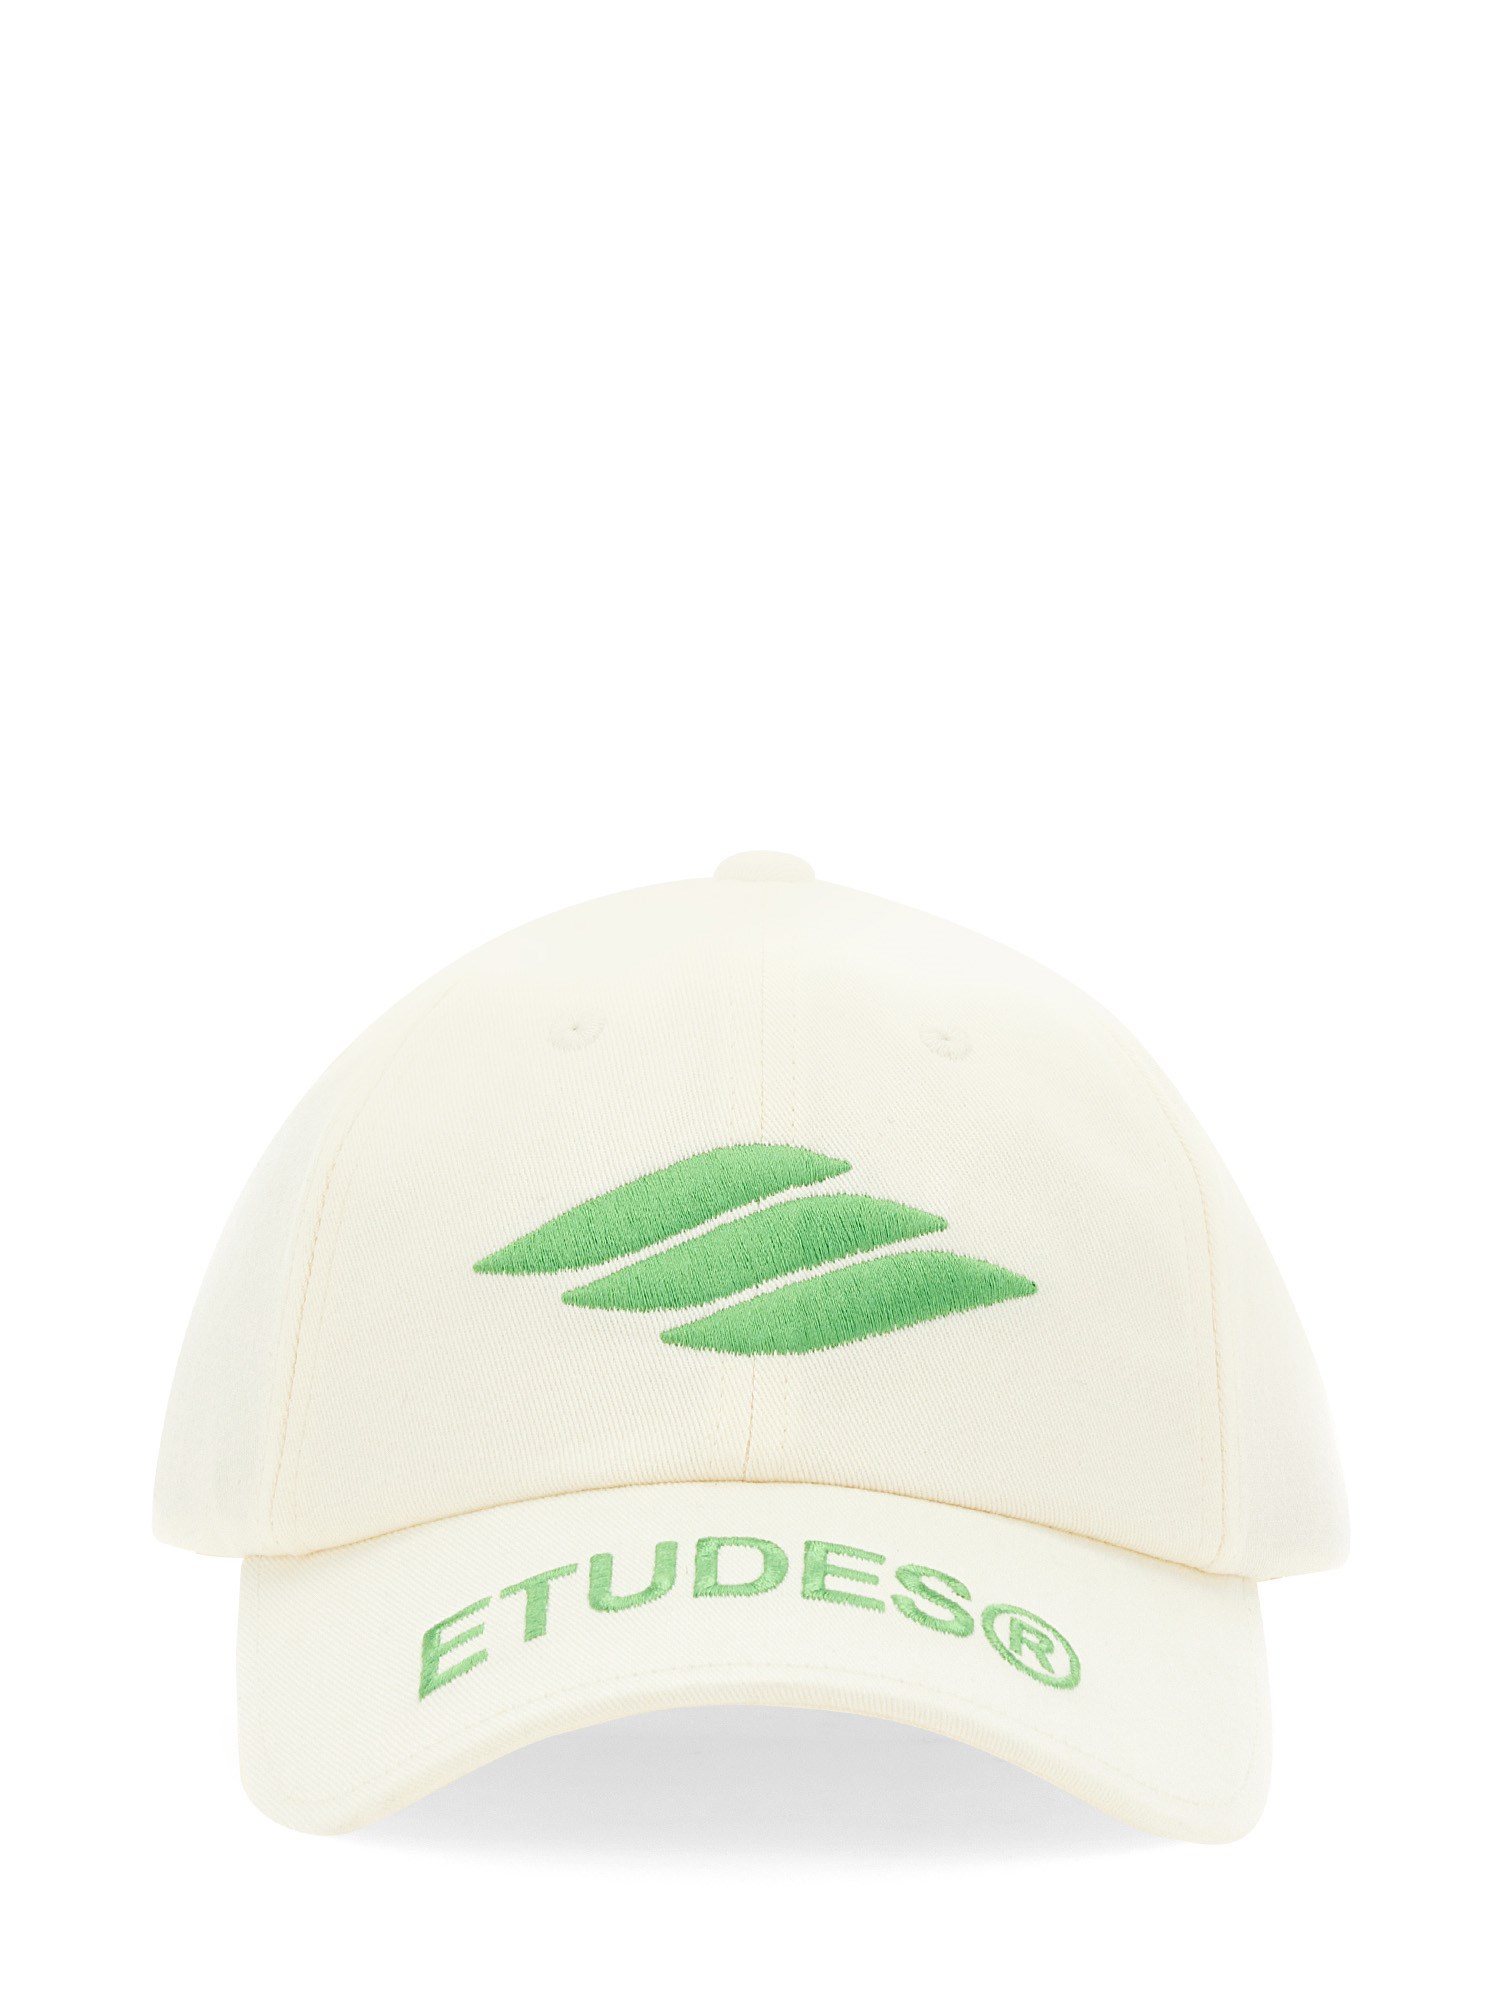 Ã©tudes baseball hat with logo embroidery